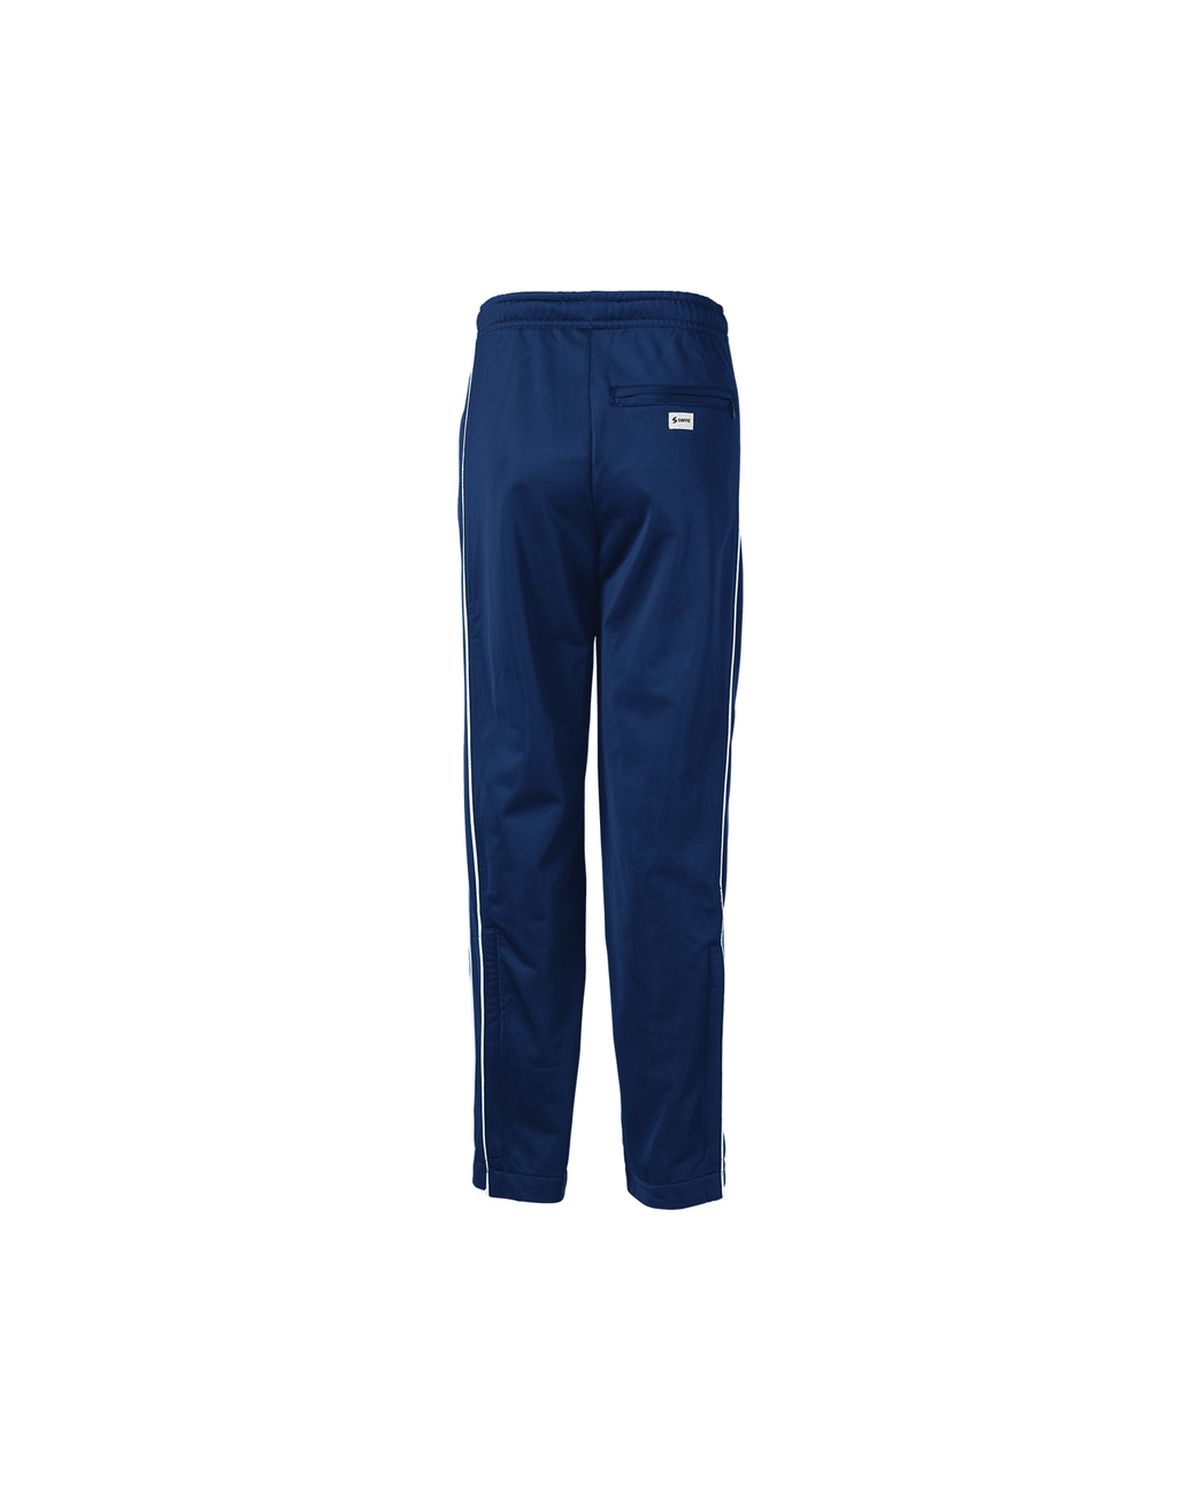 'Soffe 3245Y Youth Warm-Up Pant'